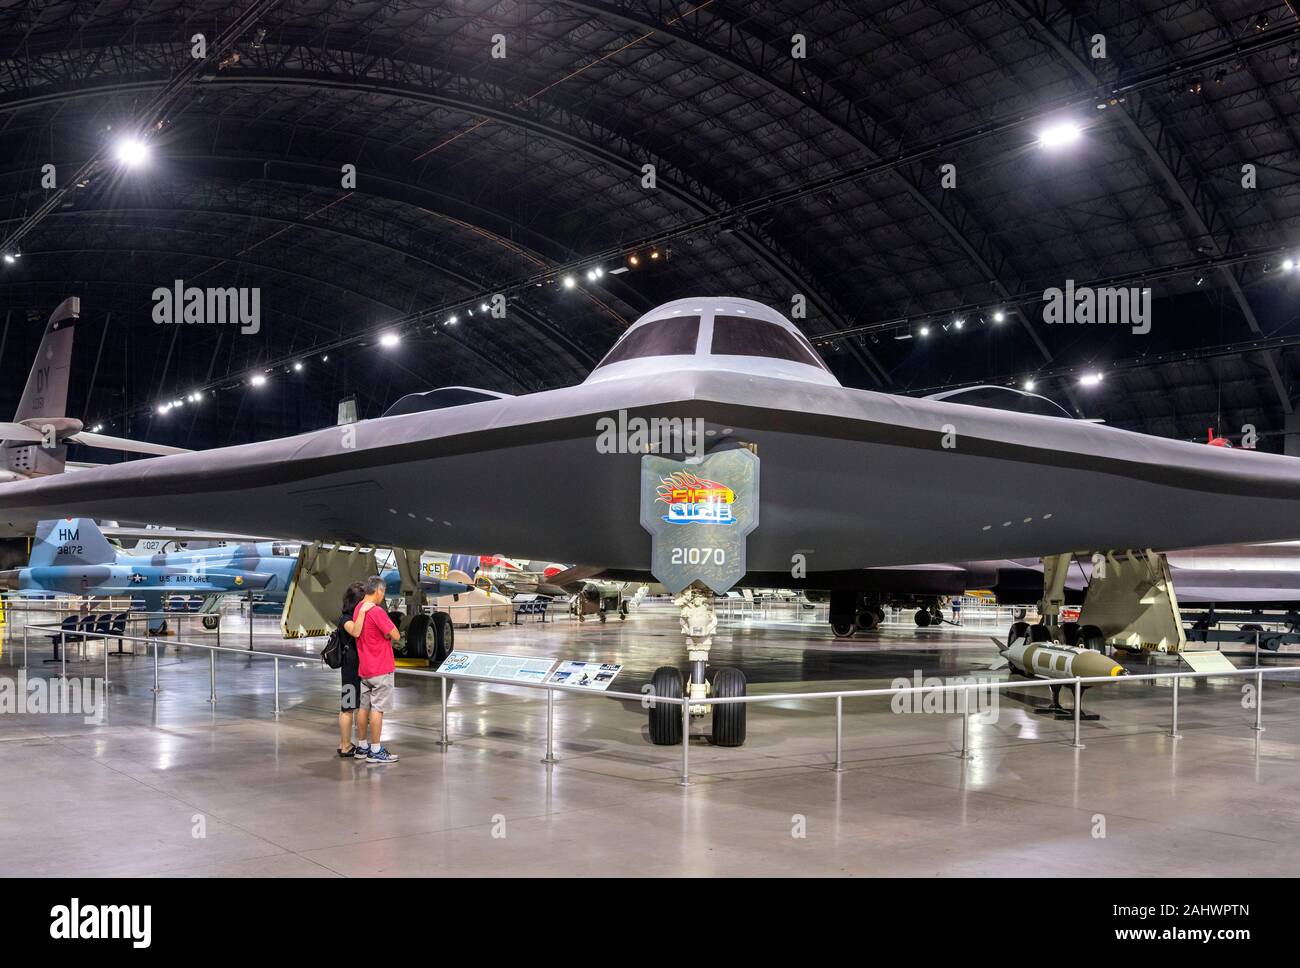 Visitors in front of a Northrop Grumman B-2 Spirit stealth bomber, National Museum of the United States Air Force (formerly the United States Air Force Museum), Dayton, Ohio, USA. Stock Photo